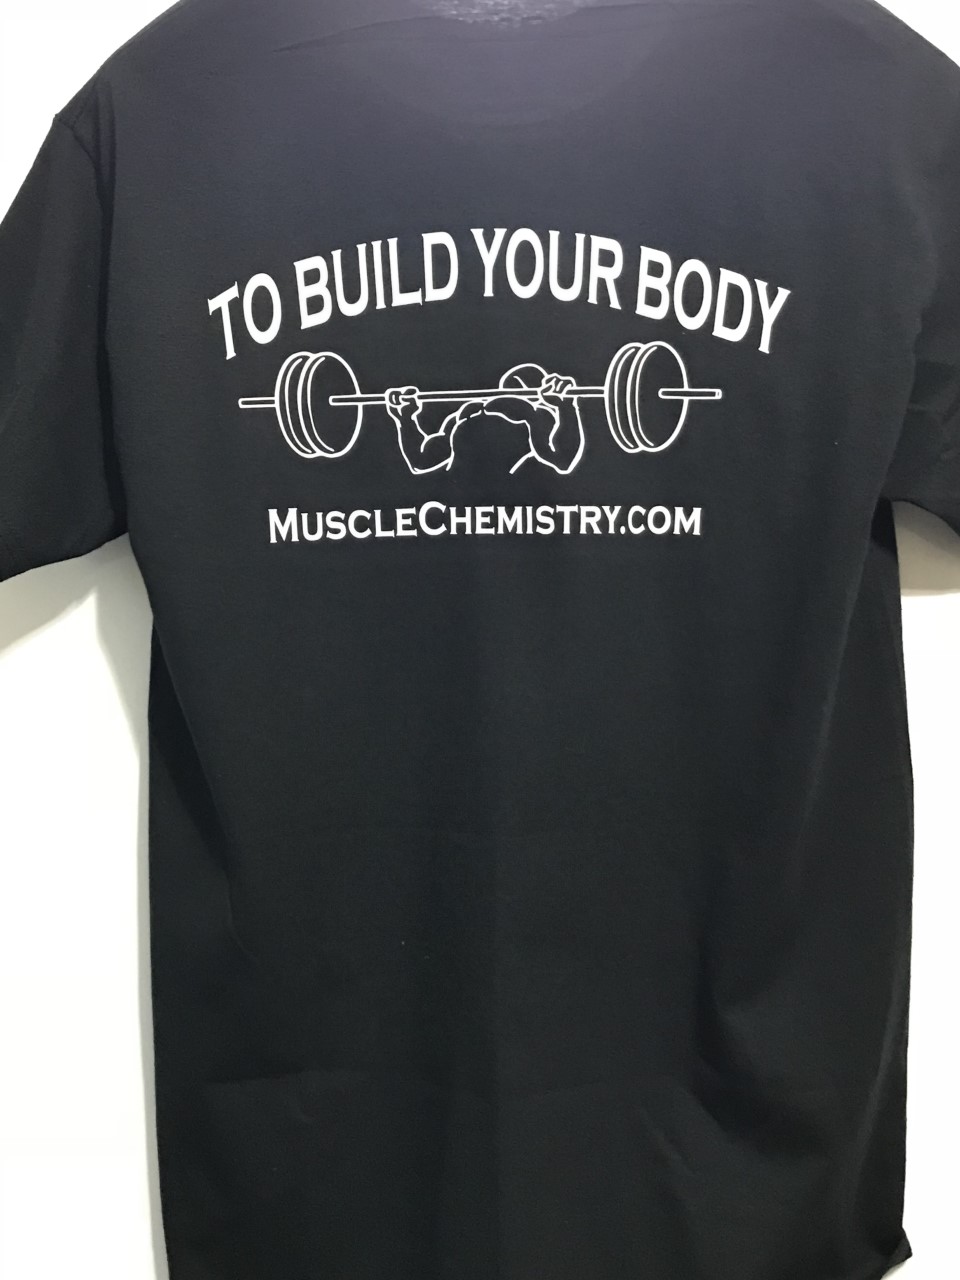 "Train Your Mind To Build Your Body" T-shirt